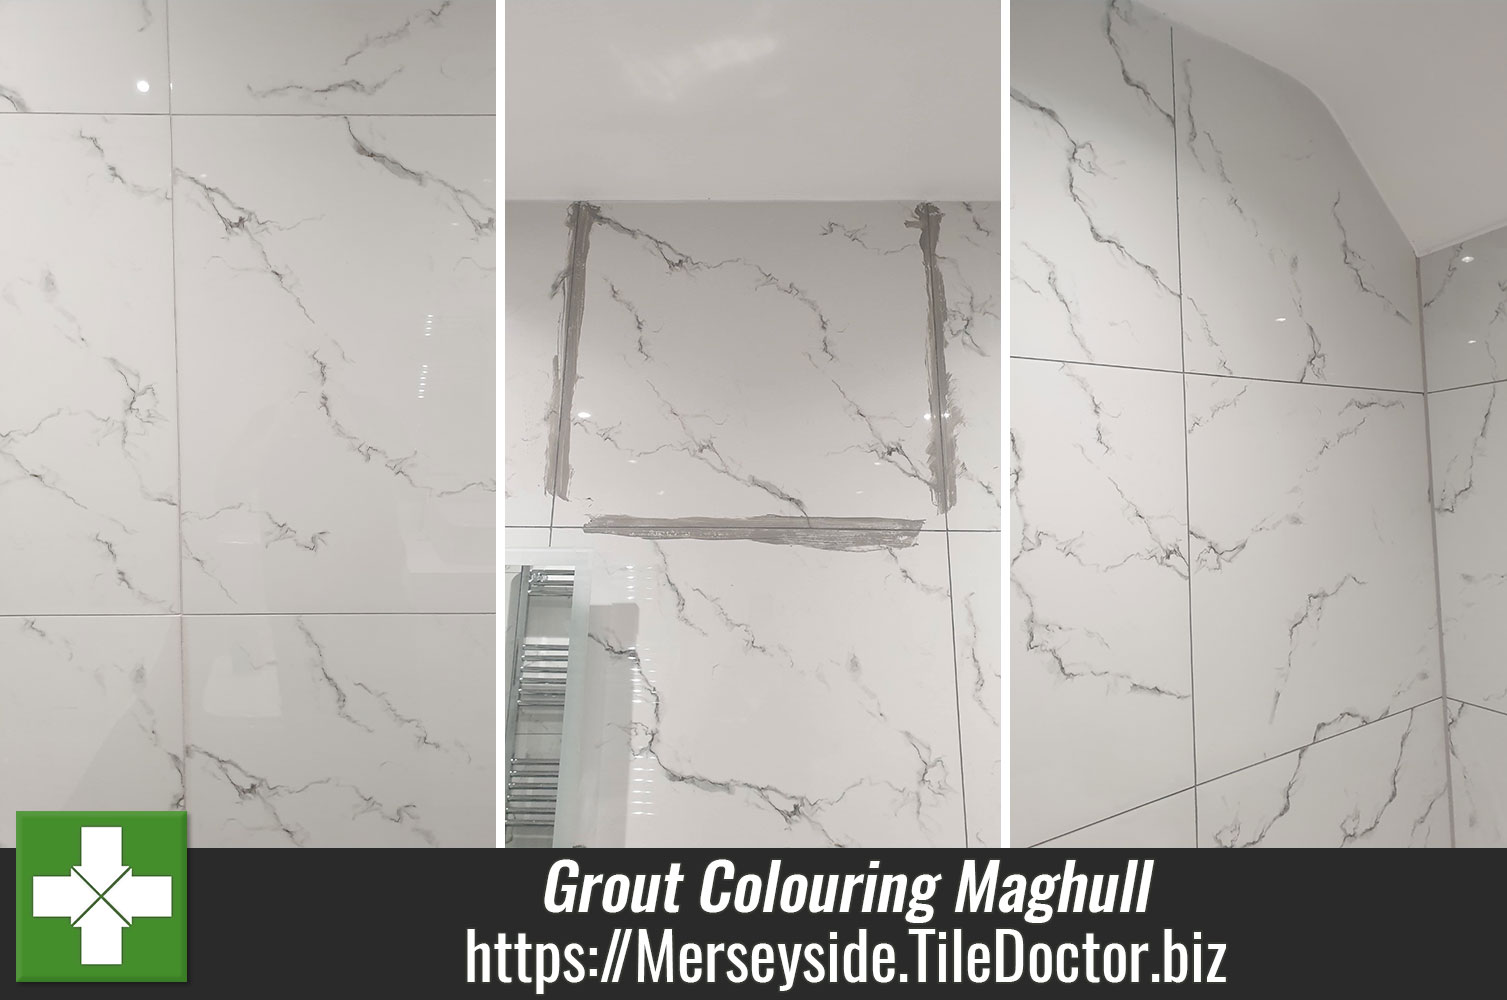 Achieving Uniform Wall Grout Colour with a Tile Doctor Grout Colourant in Merseyside